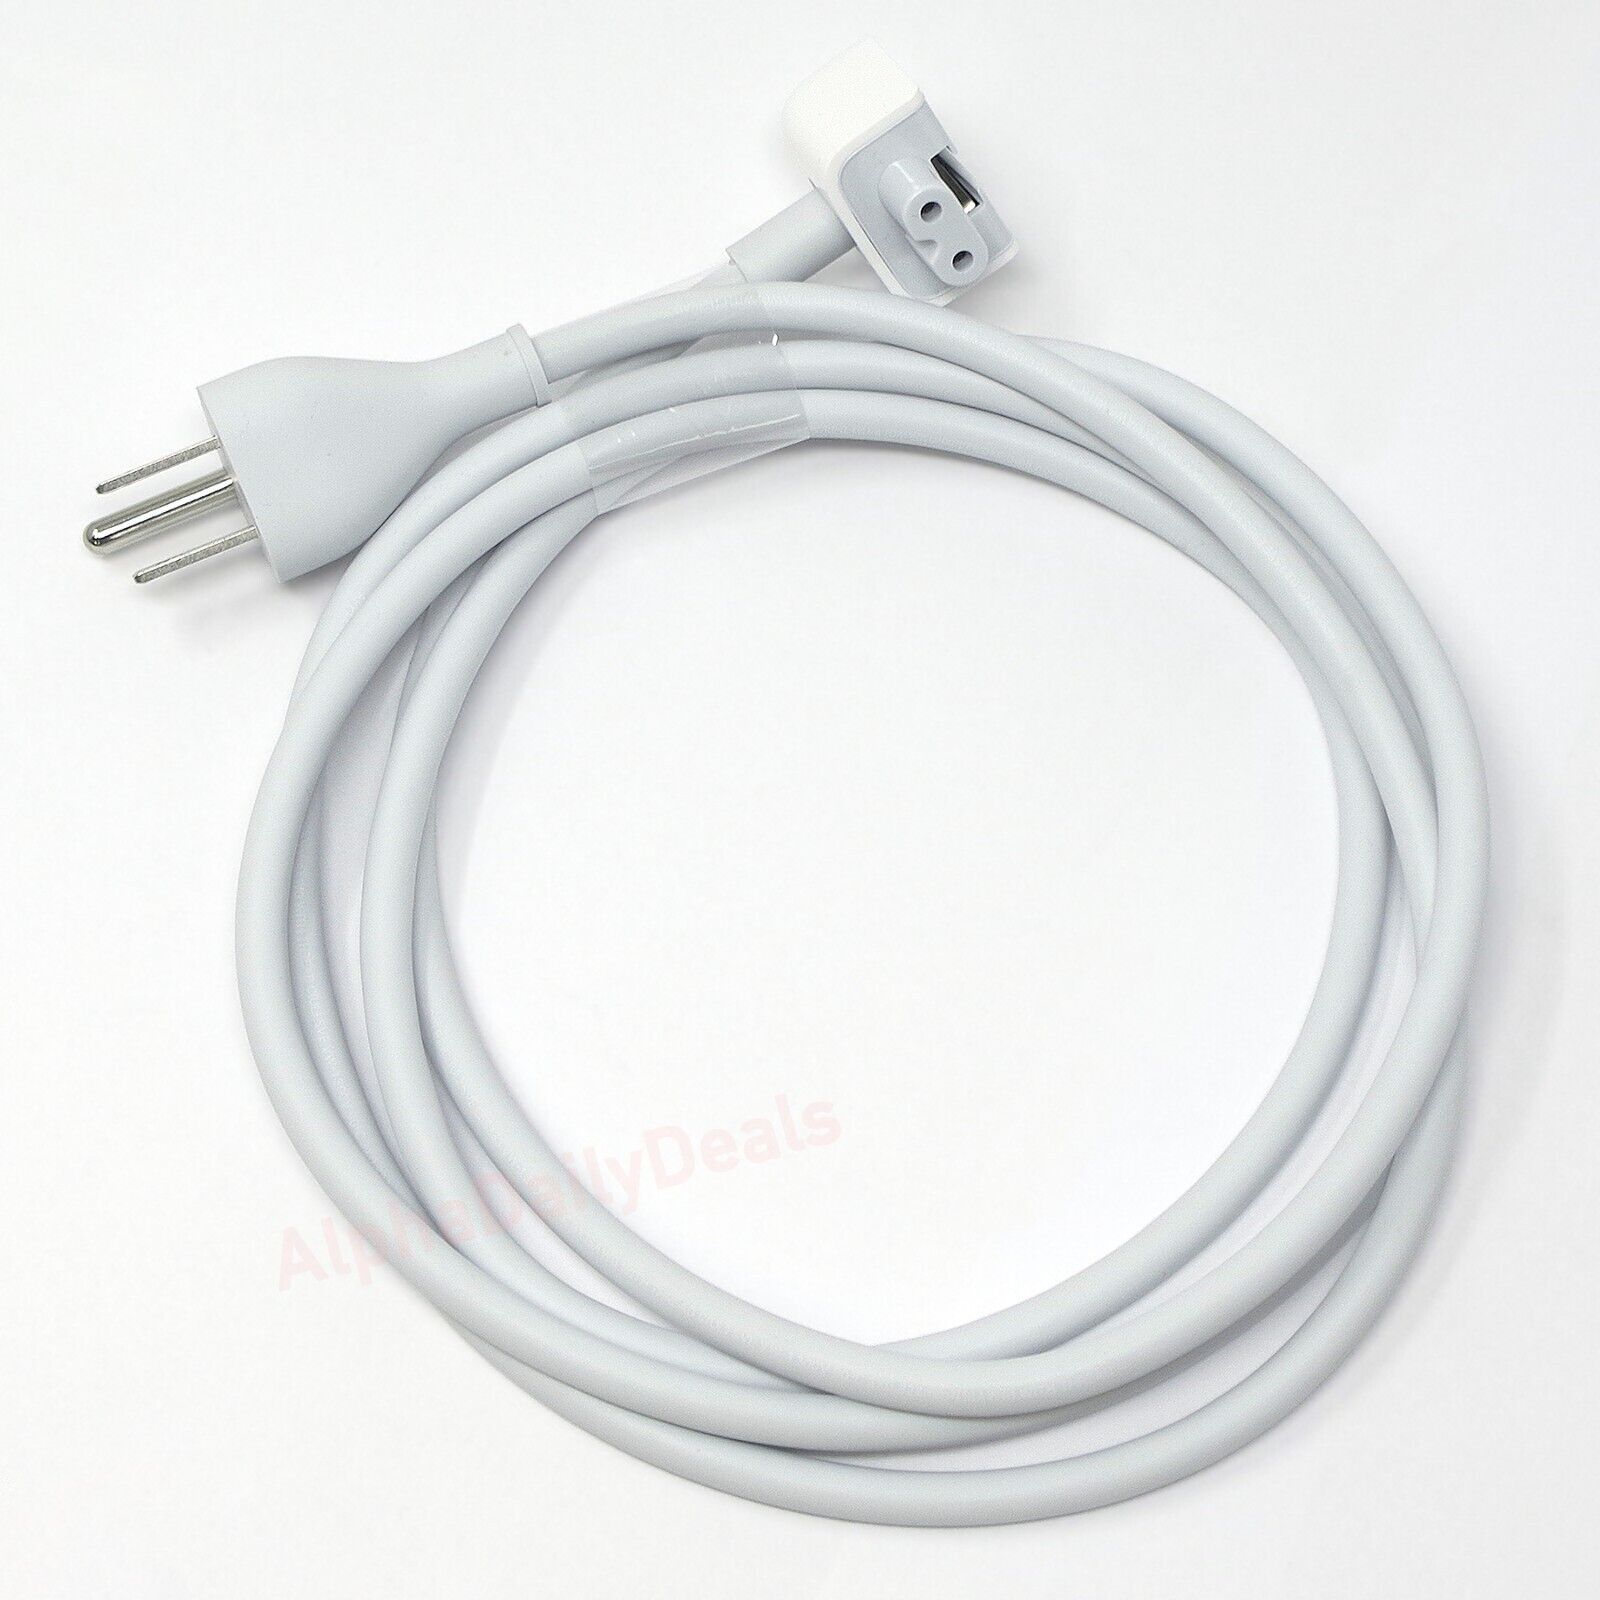 Genuine OEM Apple Power Adapter Extension Cable for MacBook Pro Air